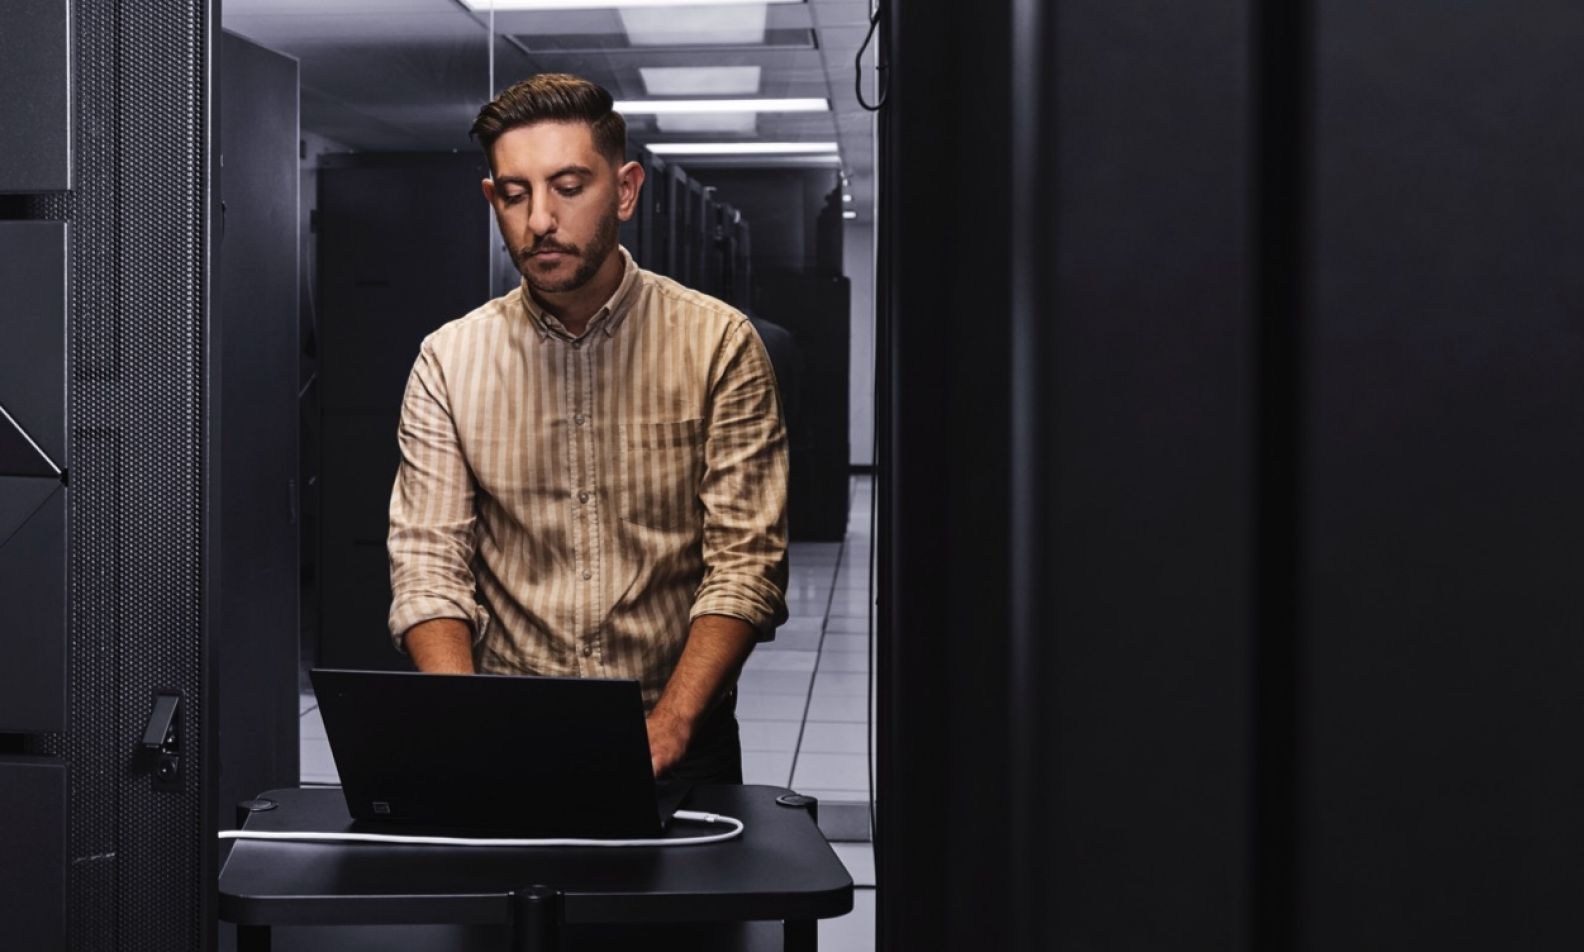 Male in server room on a laptop